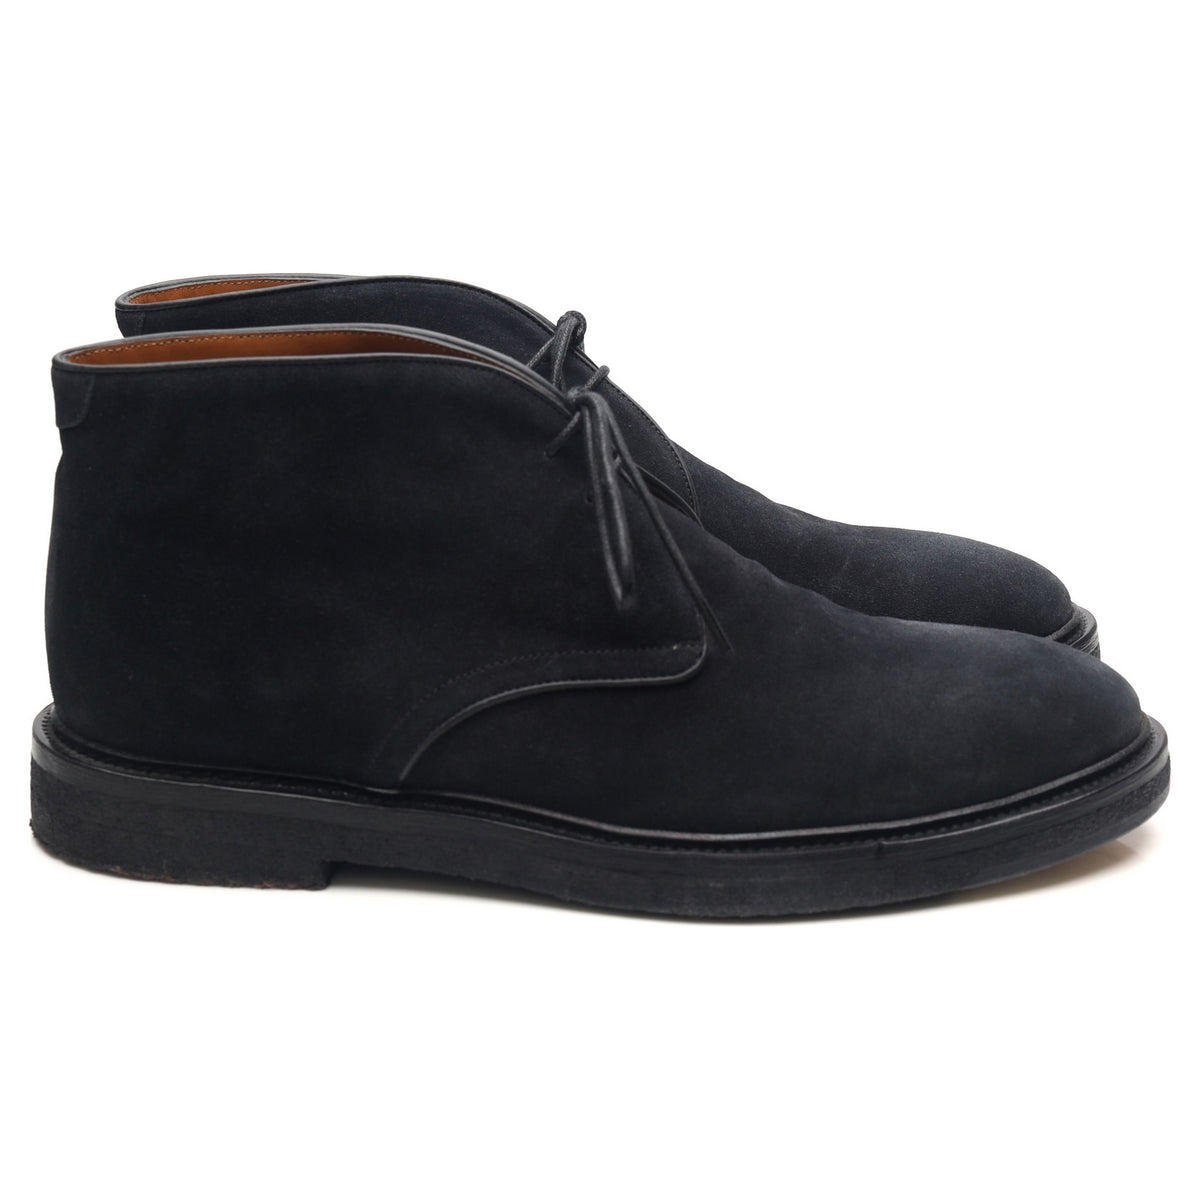 Navy Blue Suede Chukka Boots UK 8.5